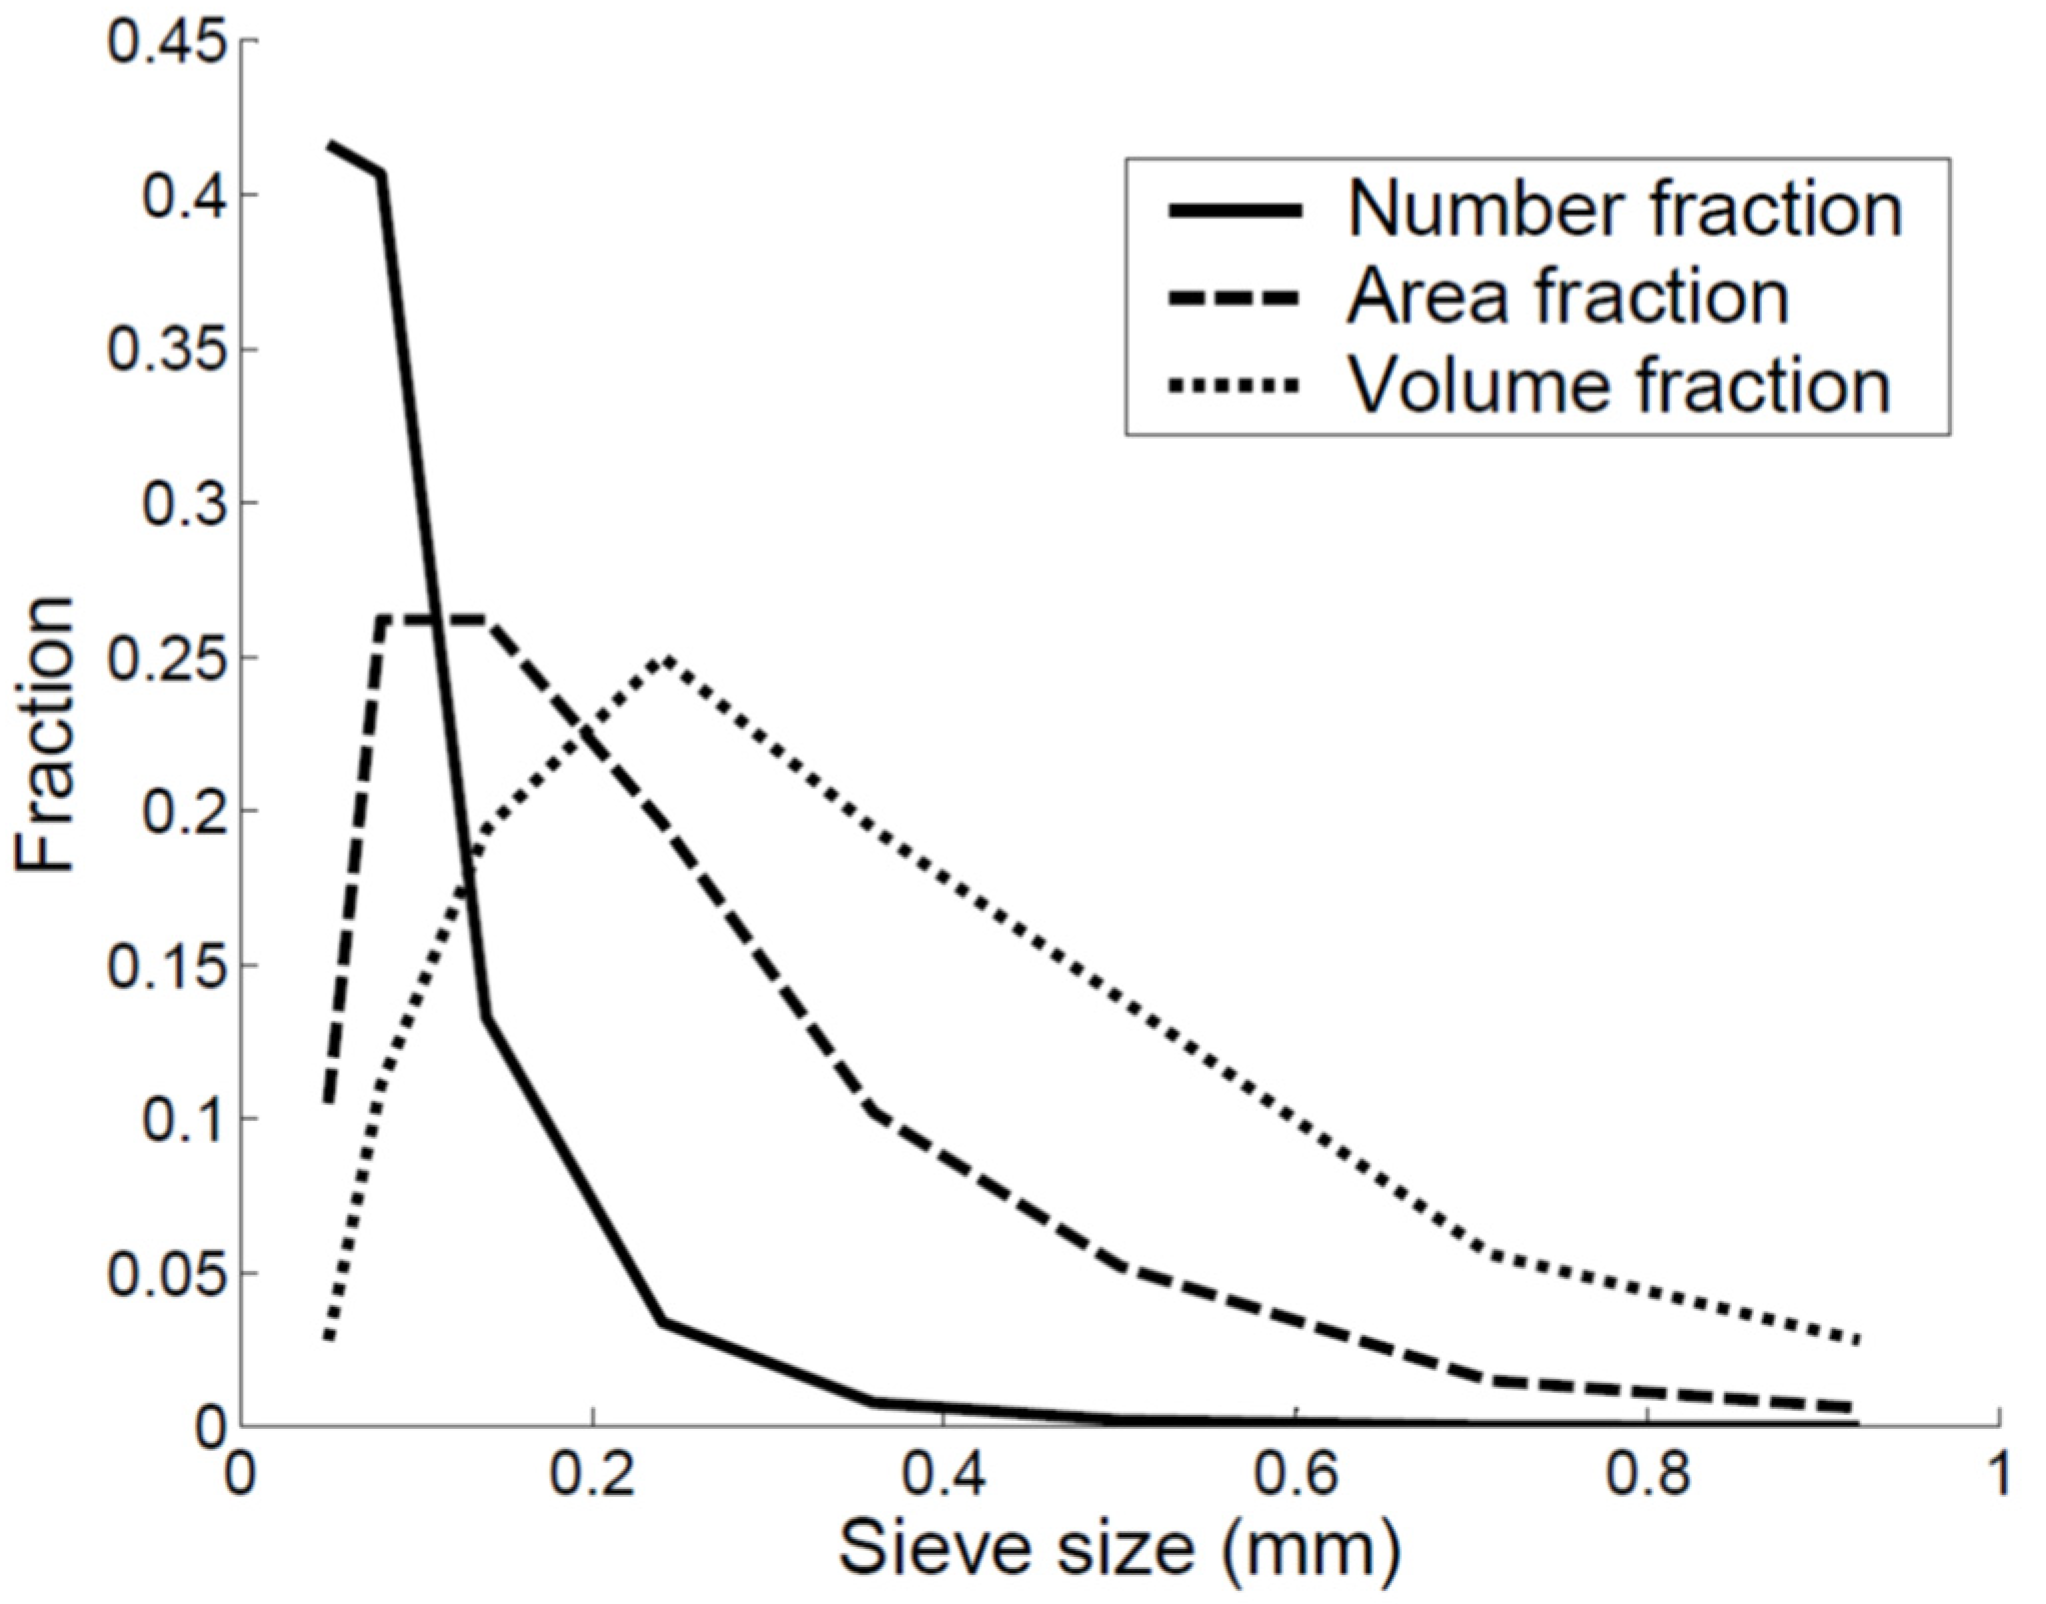 Particle size fractions and related sieve sizes used for the